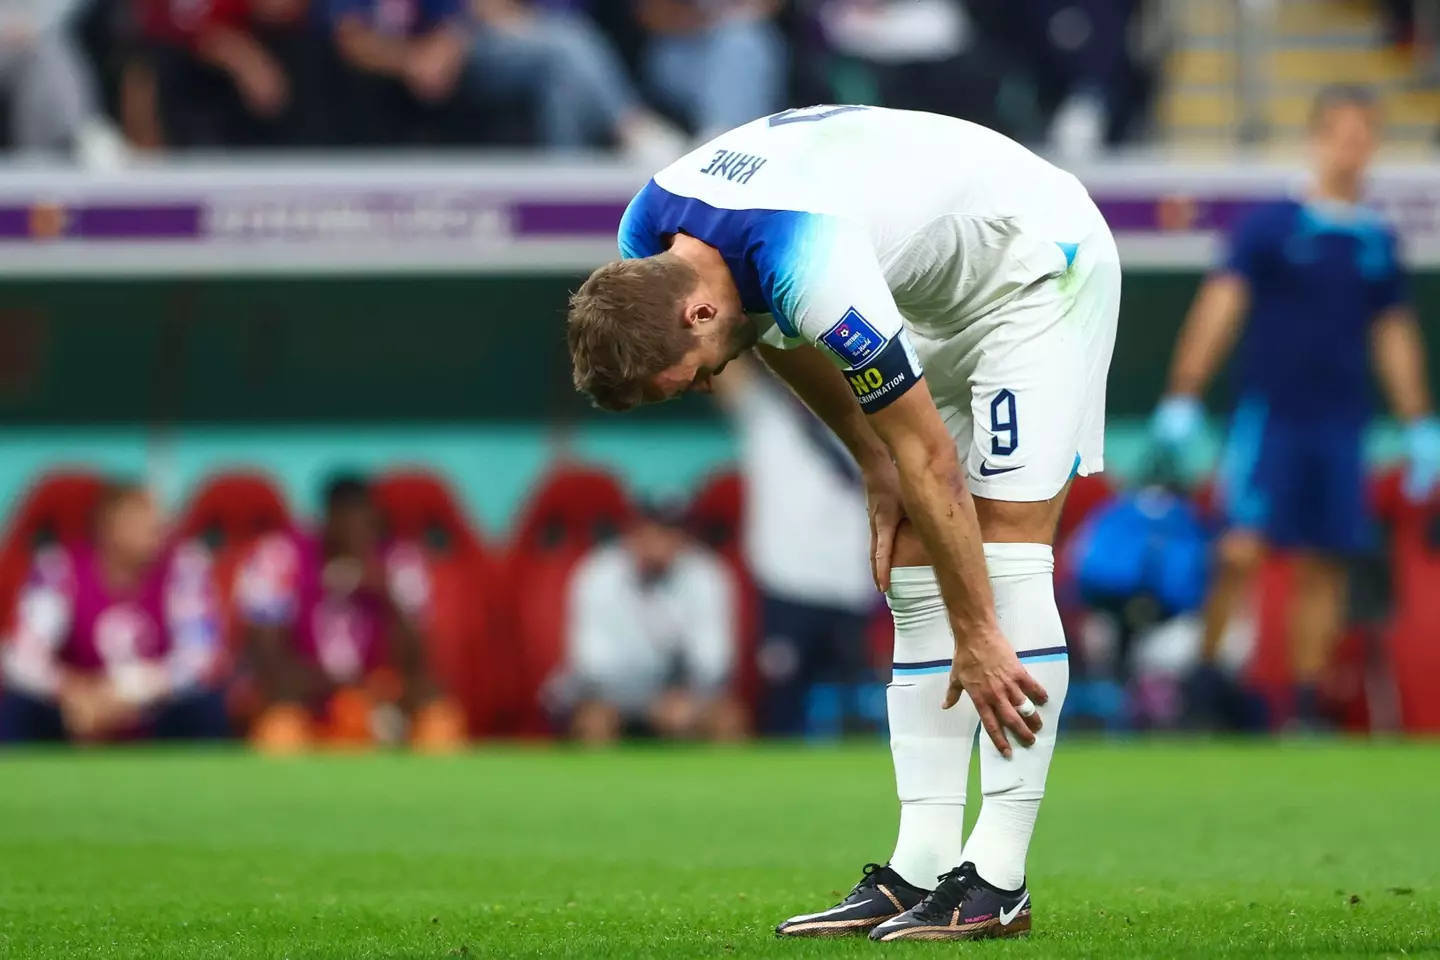 England's performance against the United States left a lot to be desired.